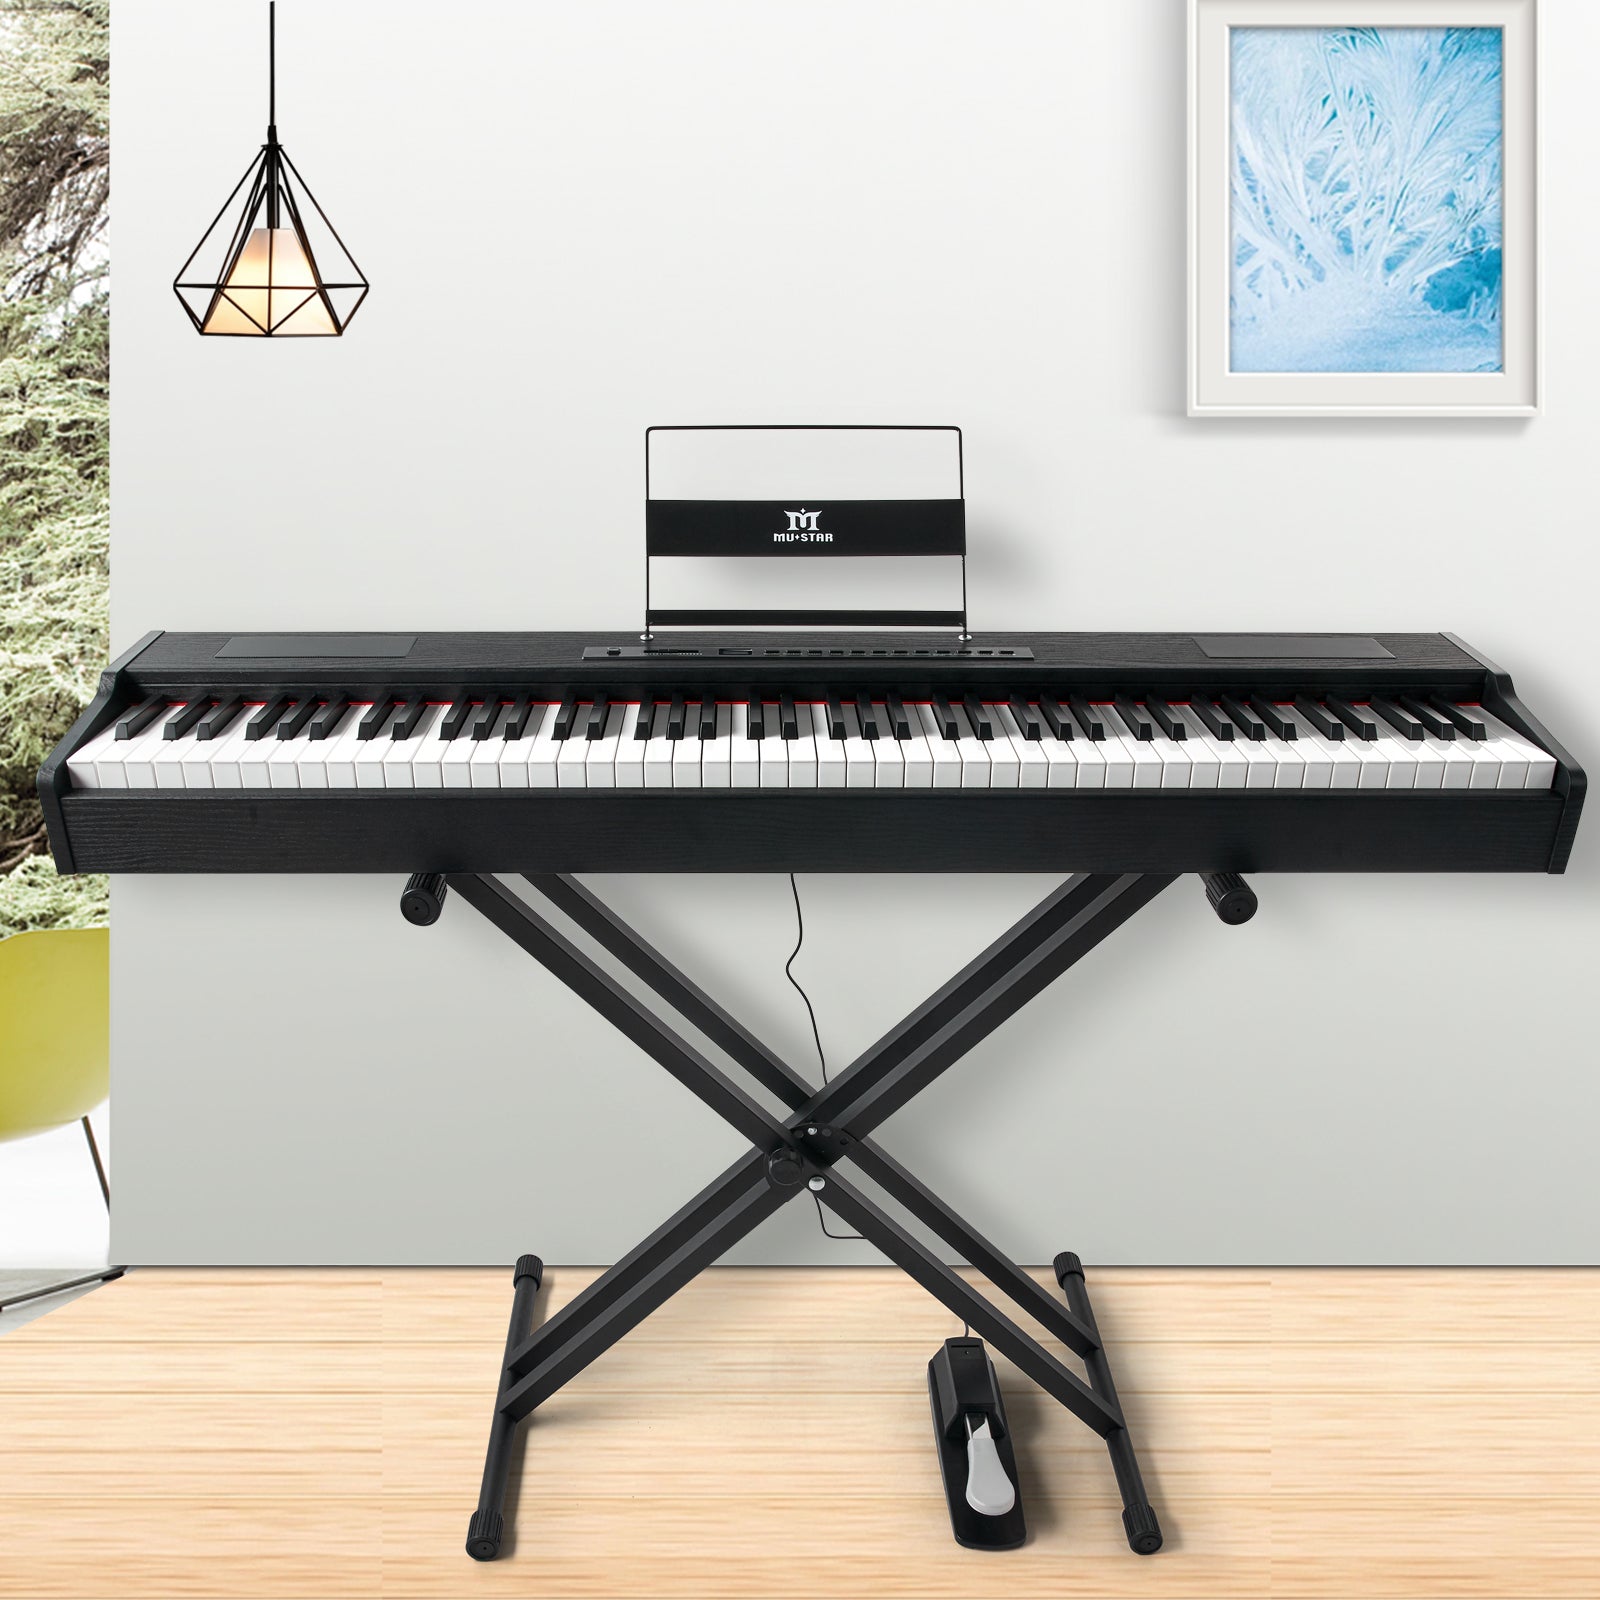 Yamaha p-125 digital piano, Black, 88 Keys, Stand and pedal included in  pricing